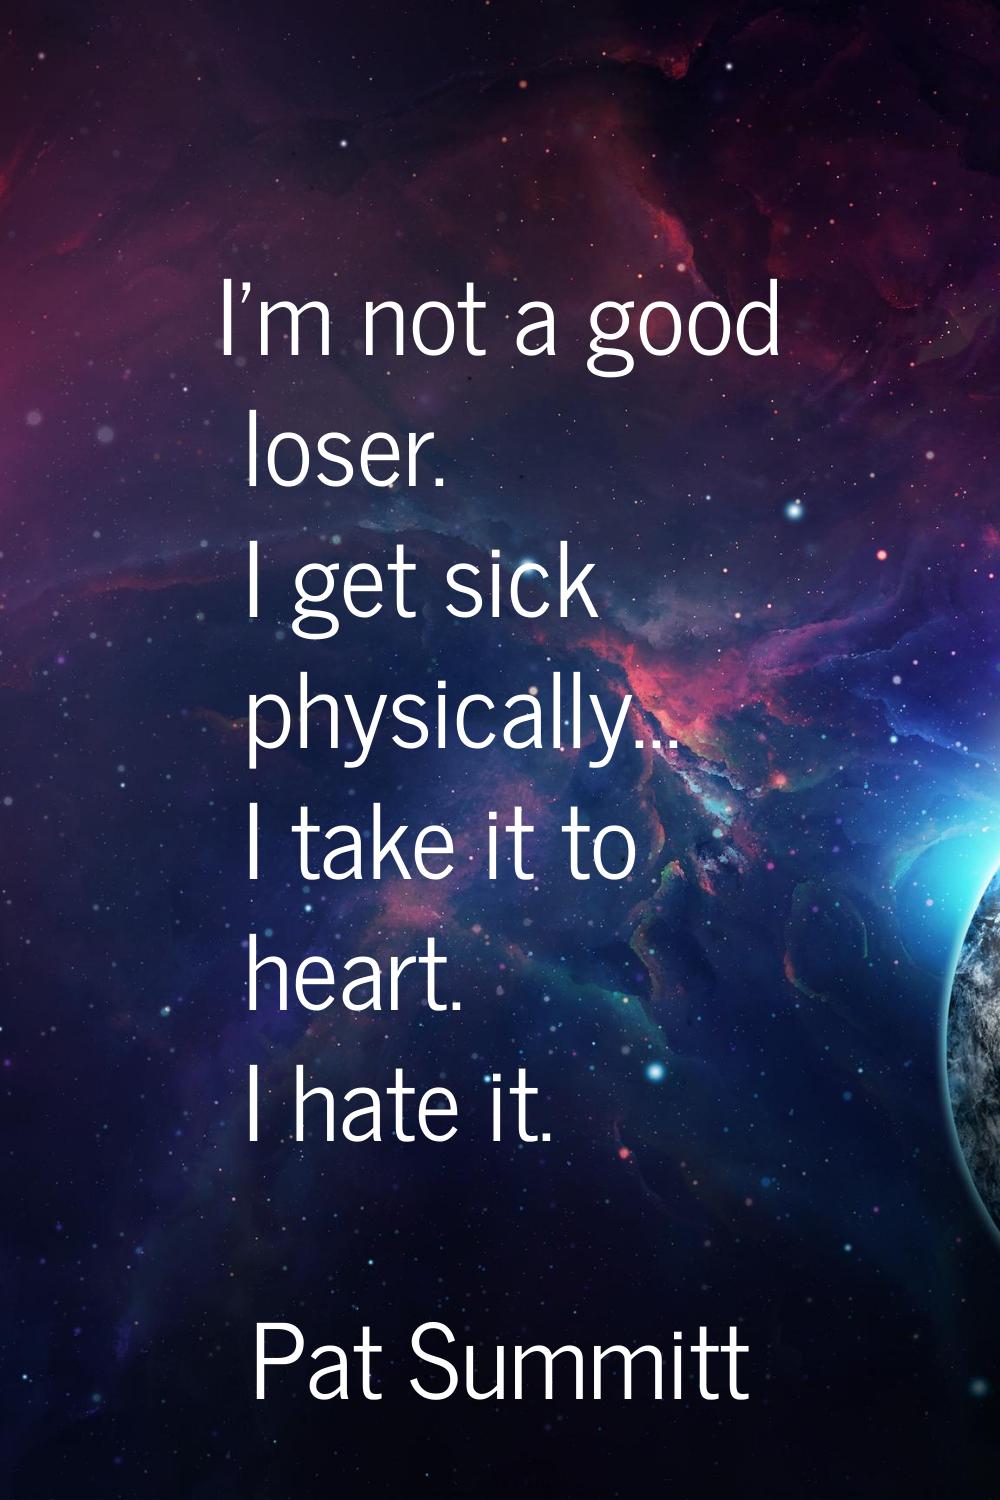 I'm not a good loser. I get sick physically... I take it to heart. I hate it.